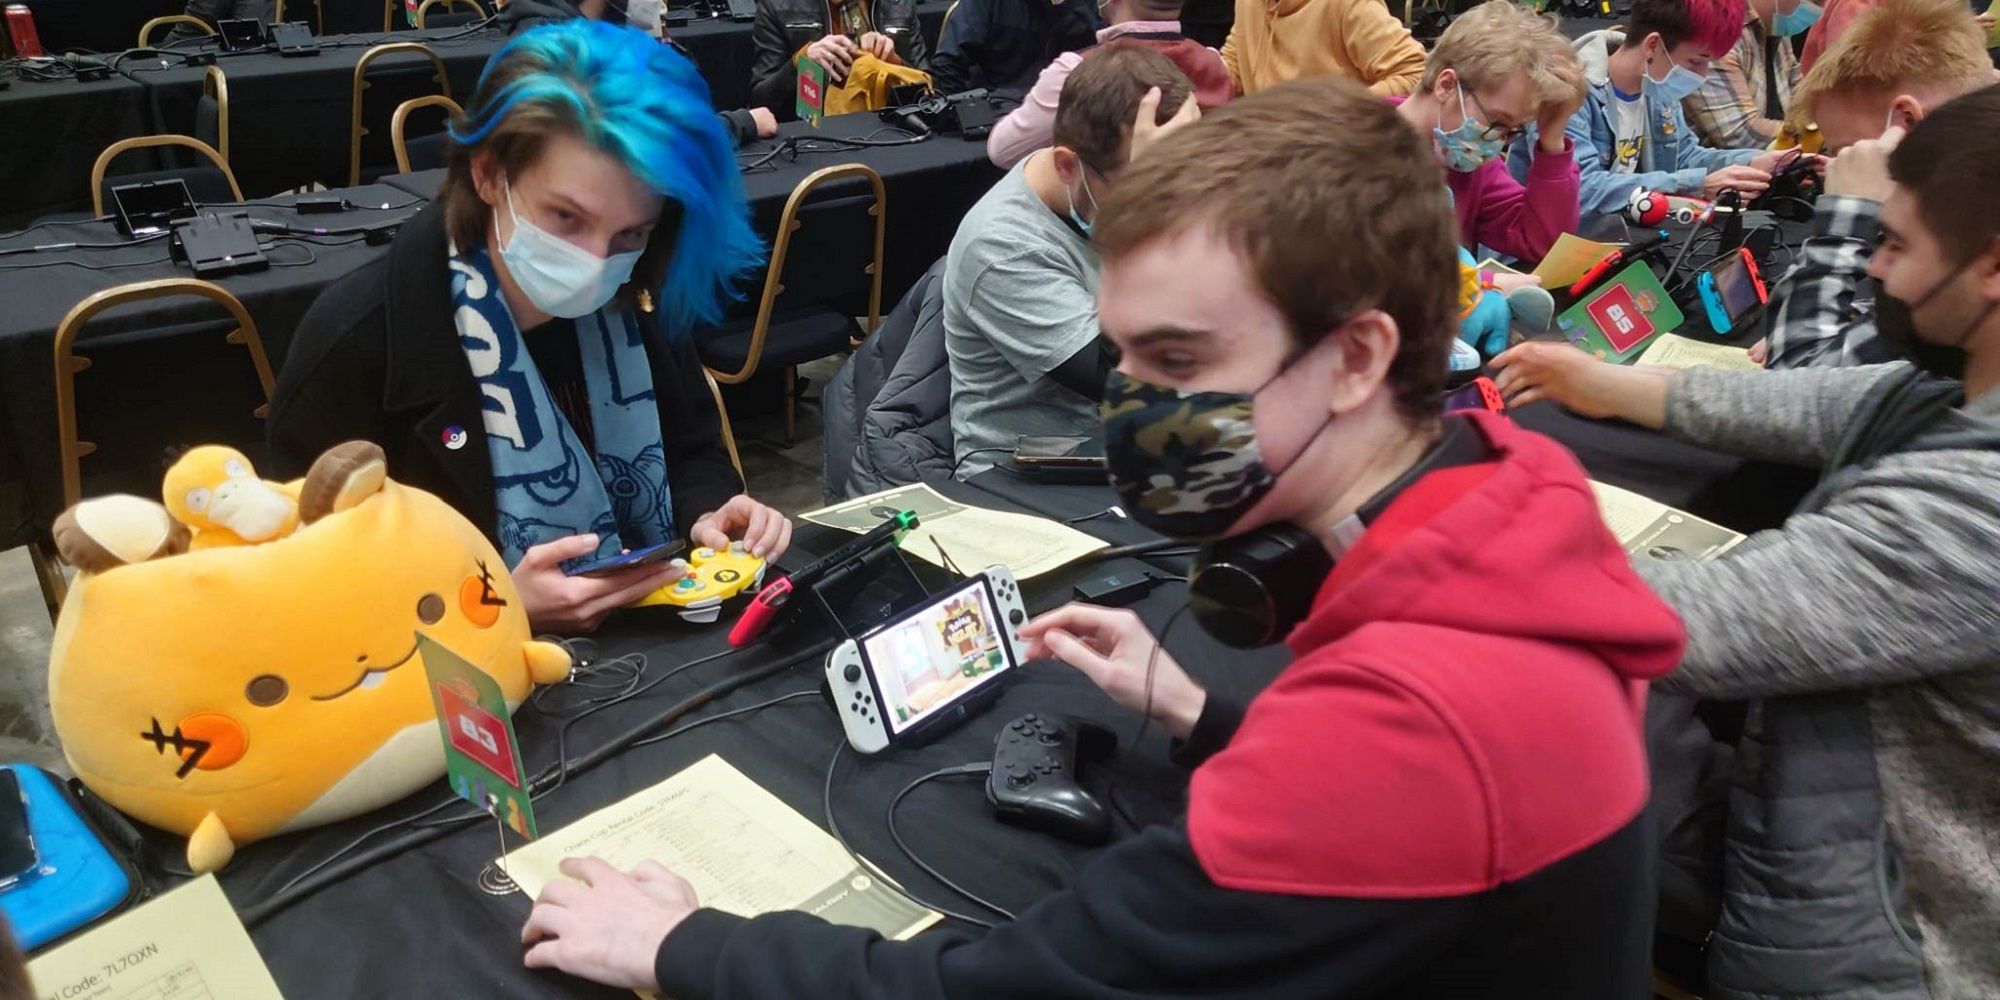 Pokemon VGC Chaos Cup Players at the Liverpool Regional